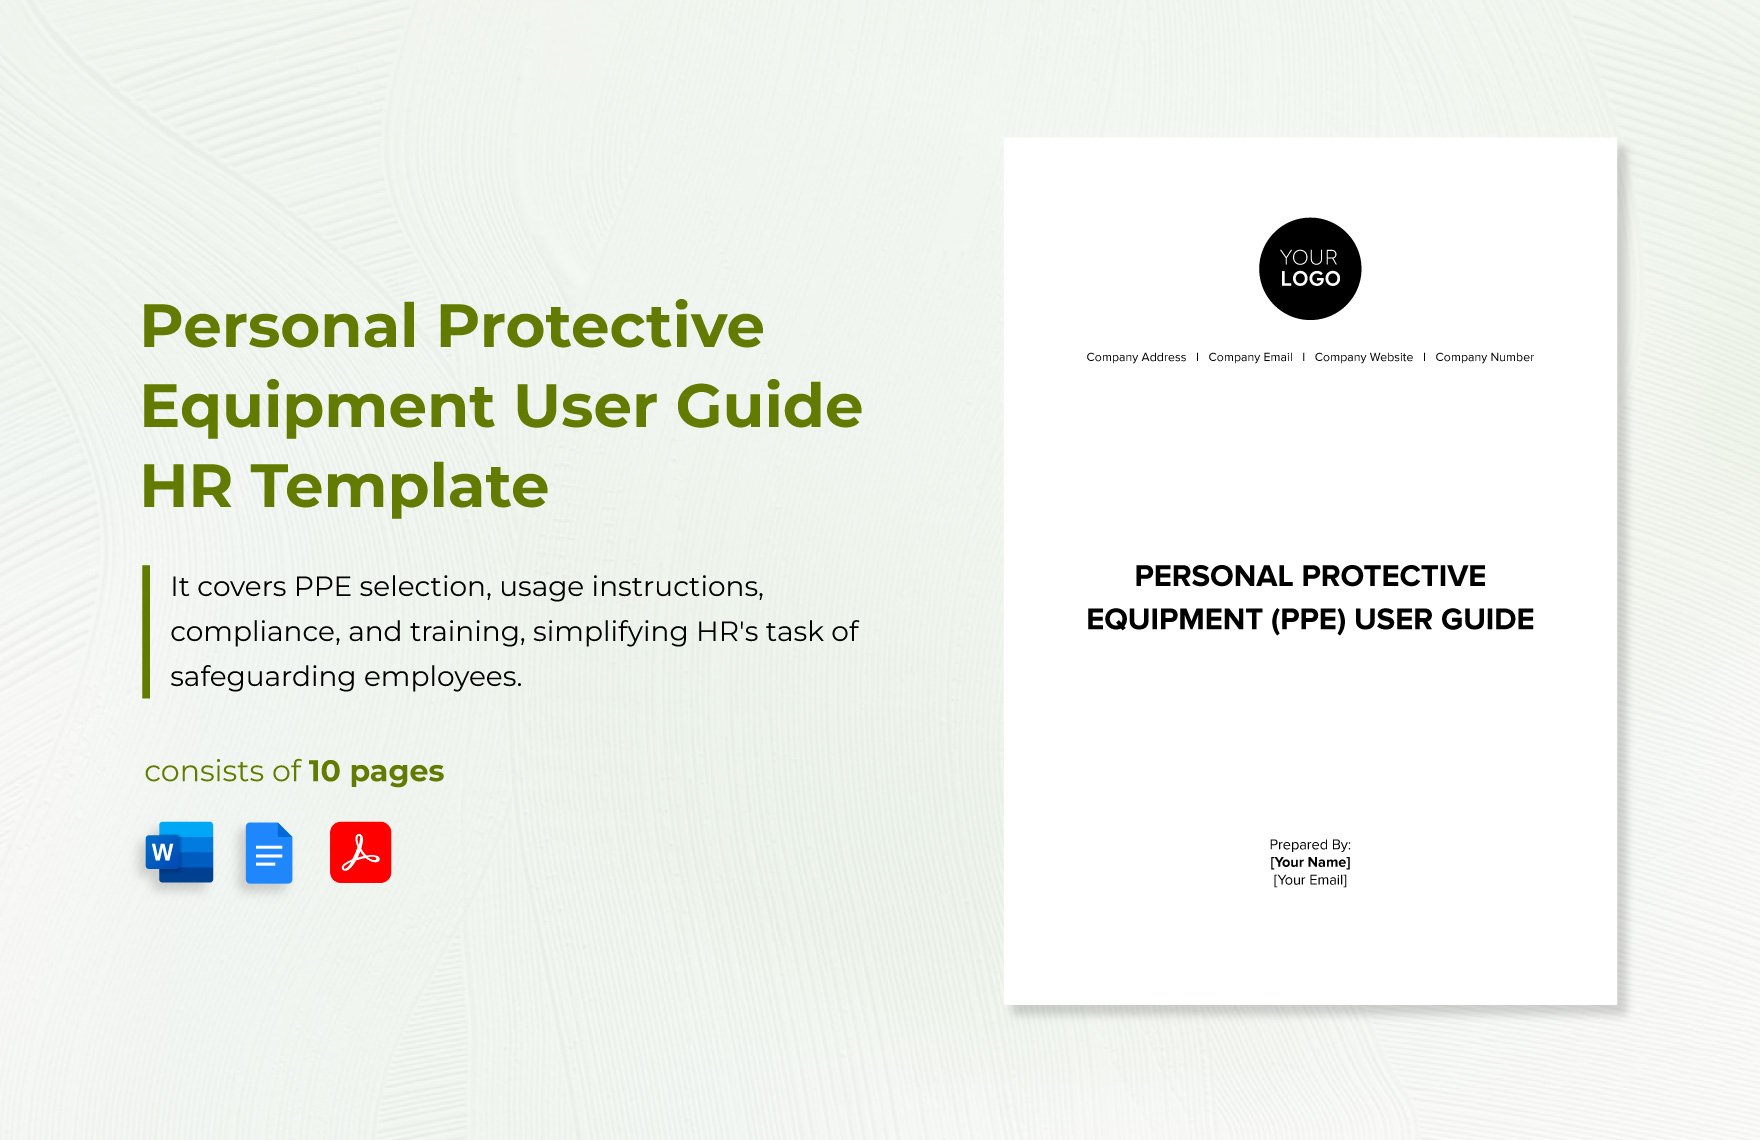 Personal Protective Equipment (PPE) User Guide HR Template in Word, Google Docs, PDF